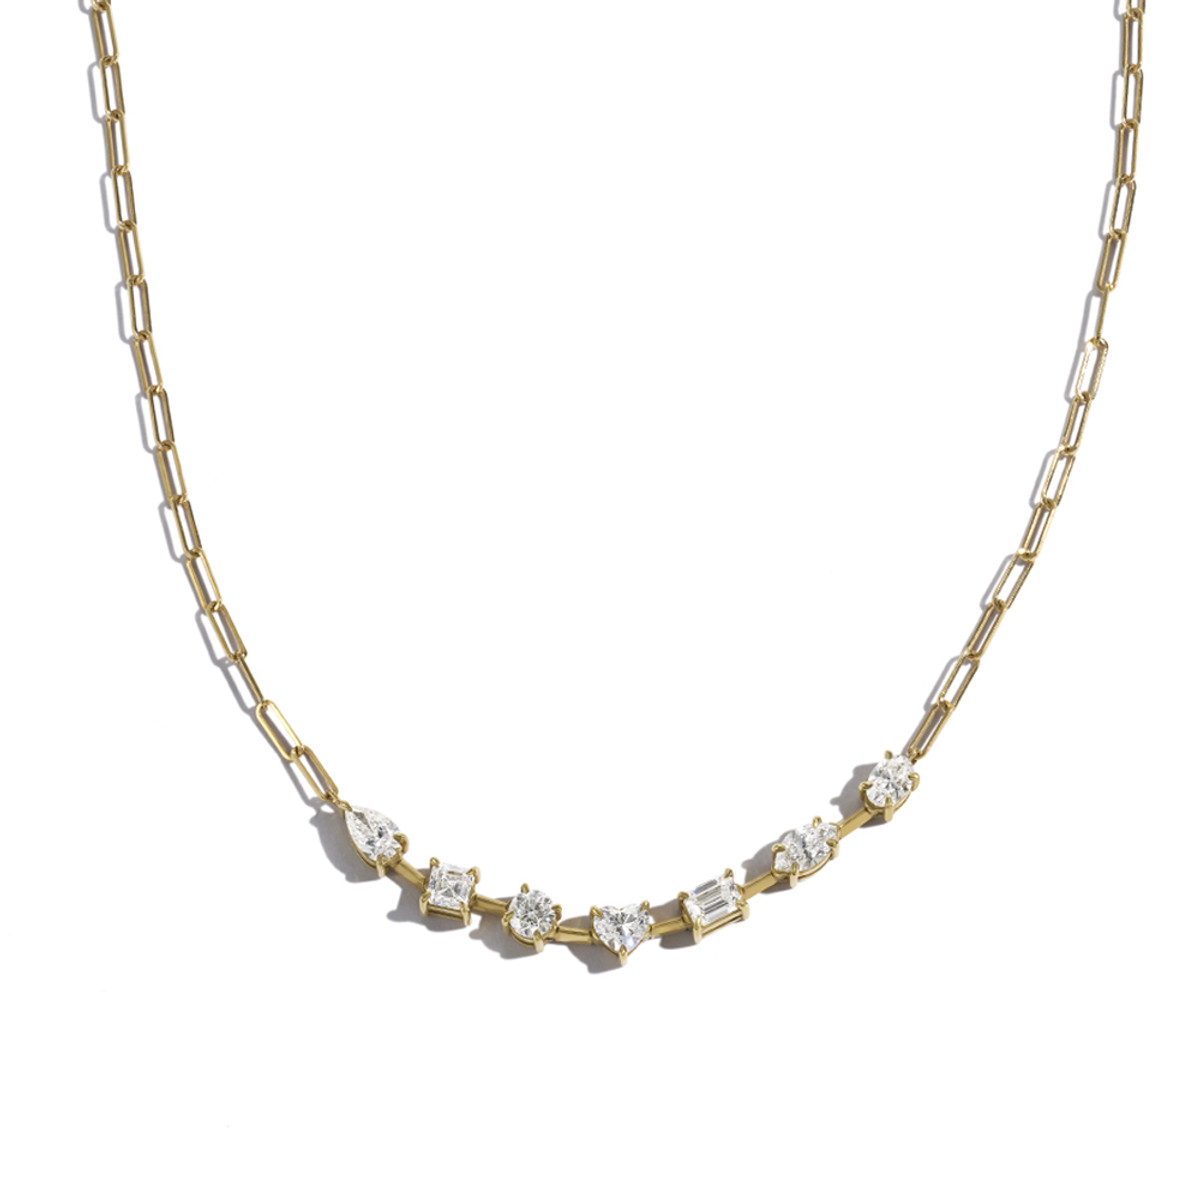 HYDE PARK 18K YELLOW GOLD FANCY SHAPES FLOATING DIAMOND NECKLACE-44014 Product Image